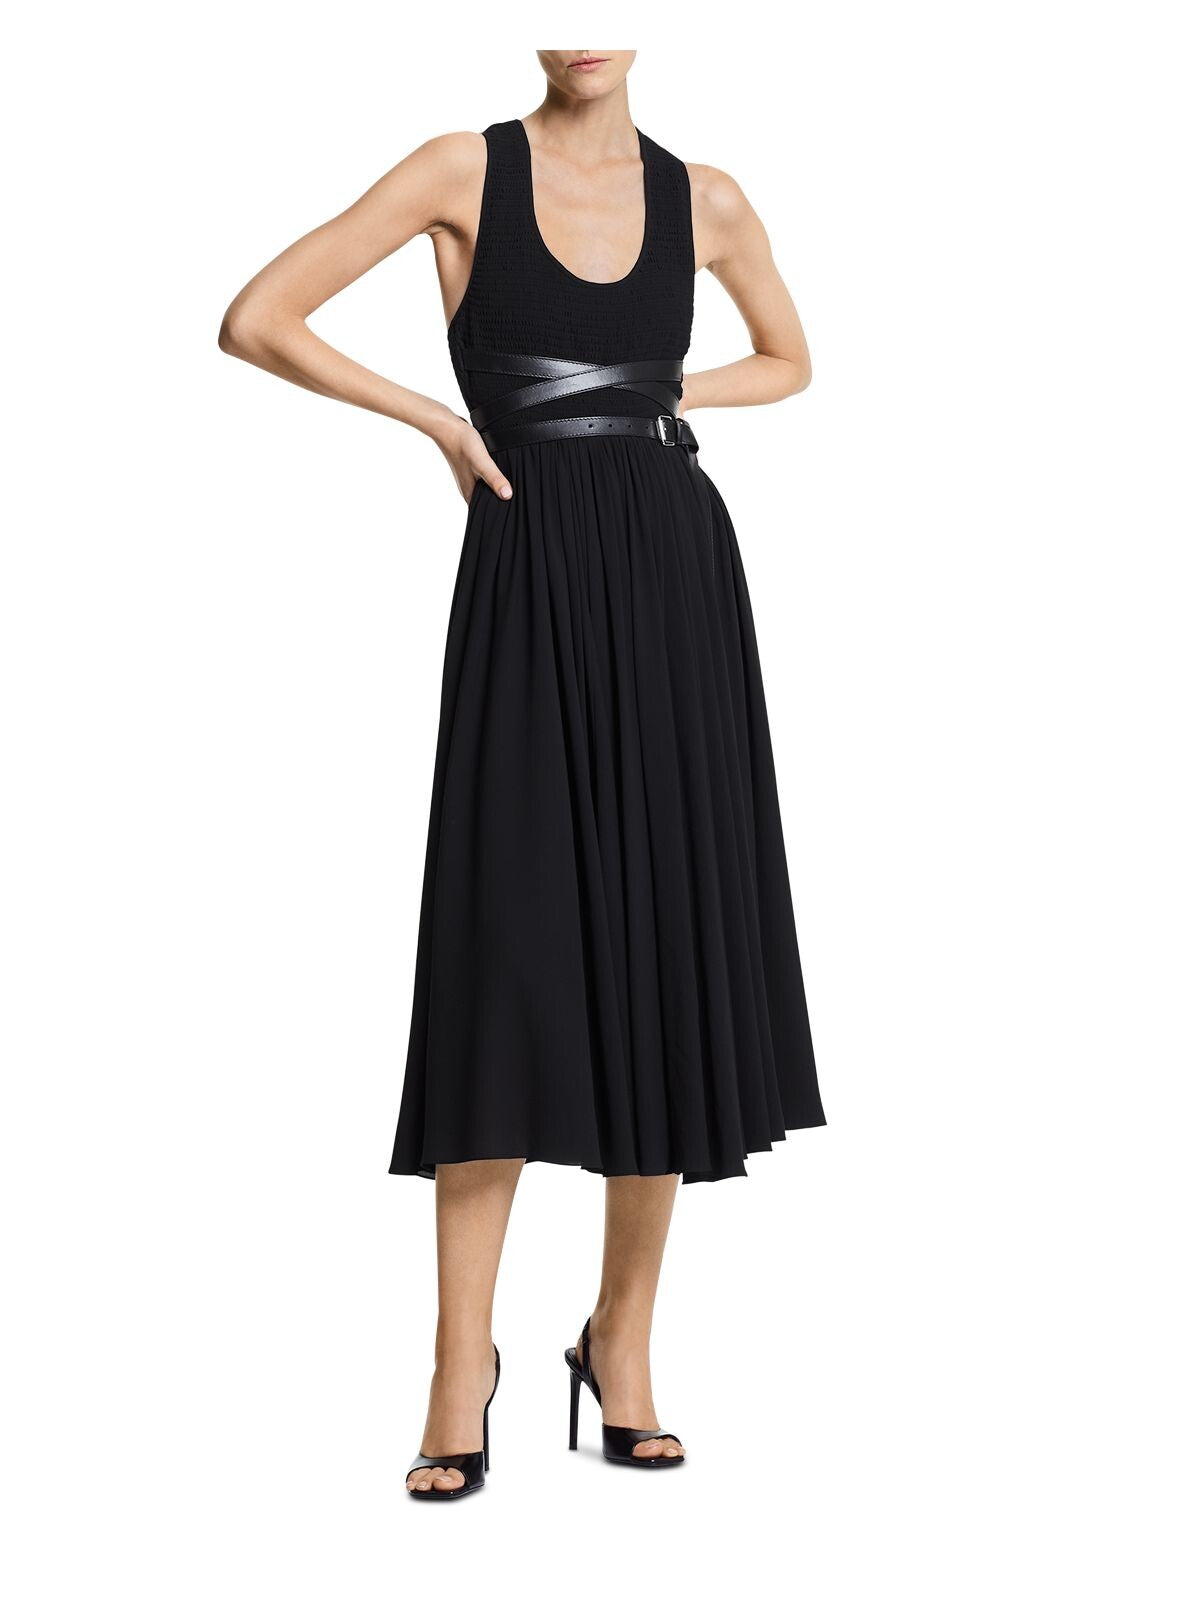 MICHAEL KORS Womens Black Zippered Racerback Smocked Attached Buckle Belt Sleeveless Scoop Neck Midi Party Fit + Flare Dress 6